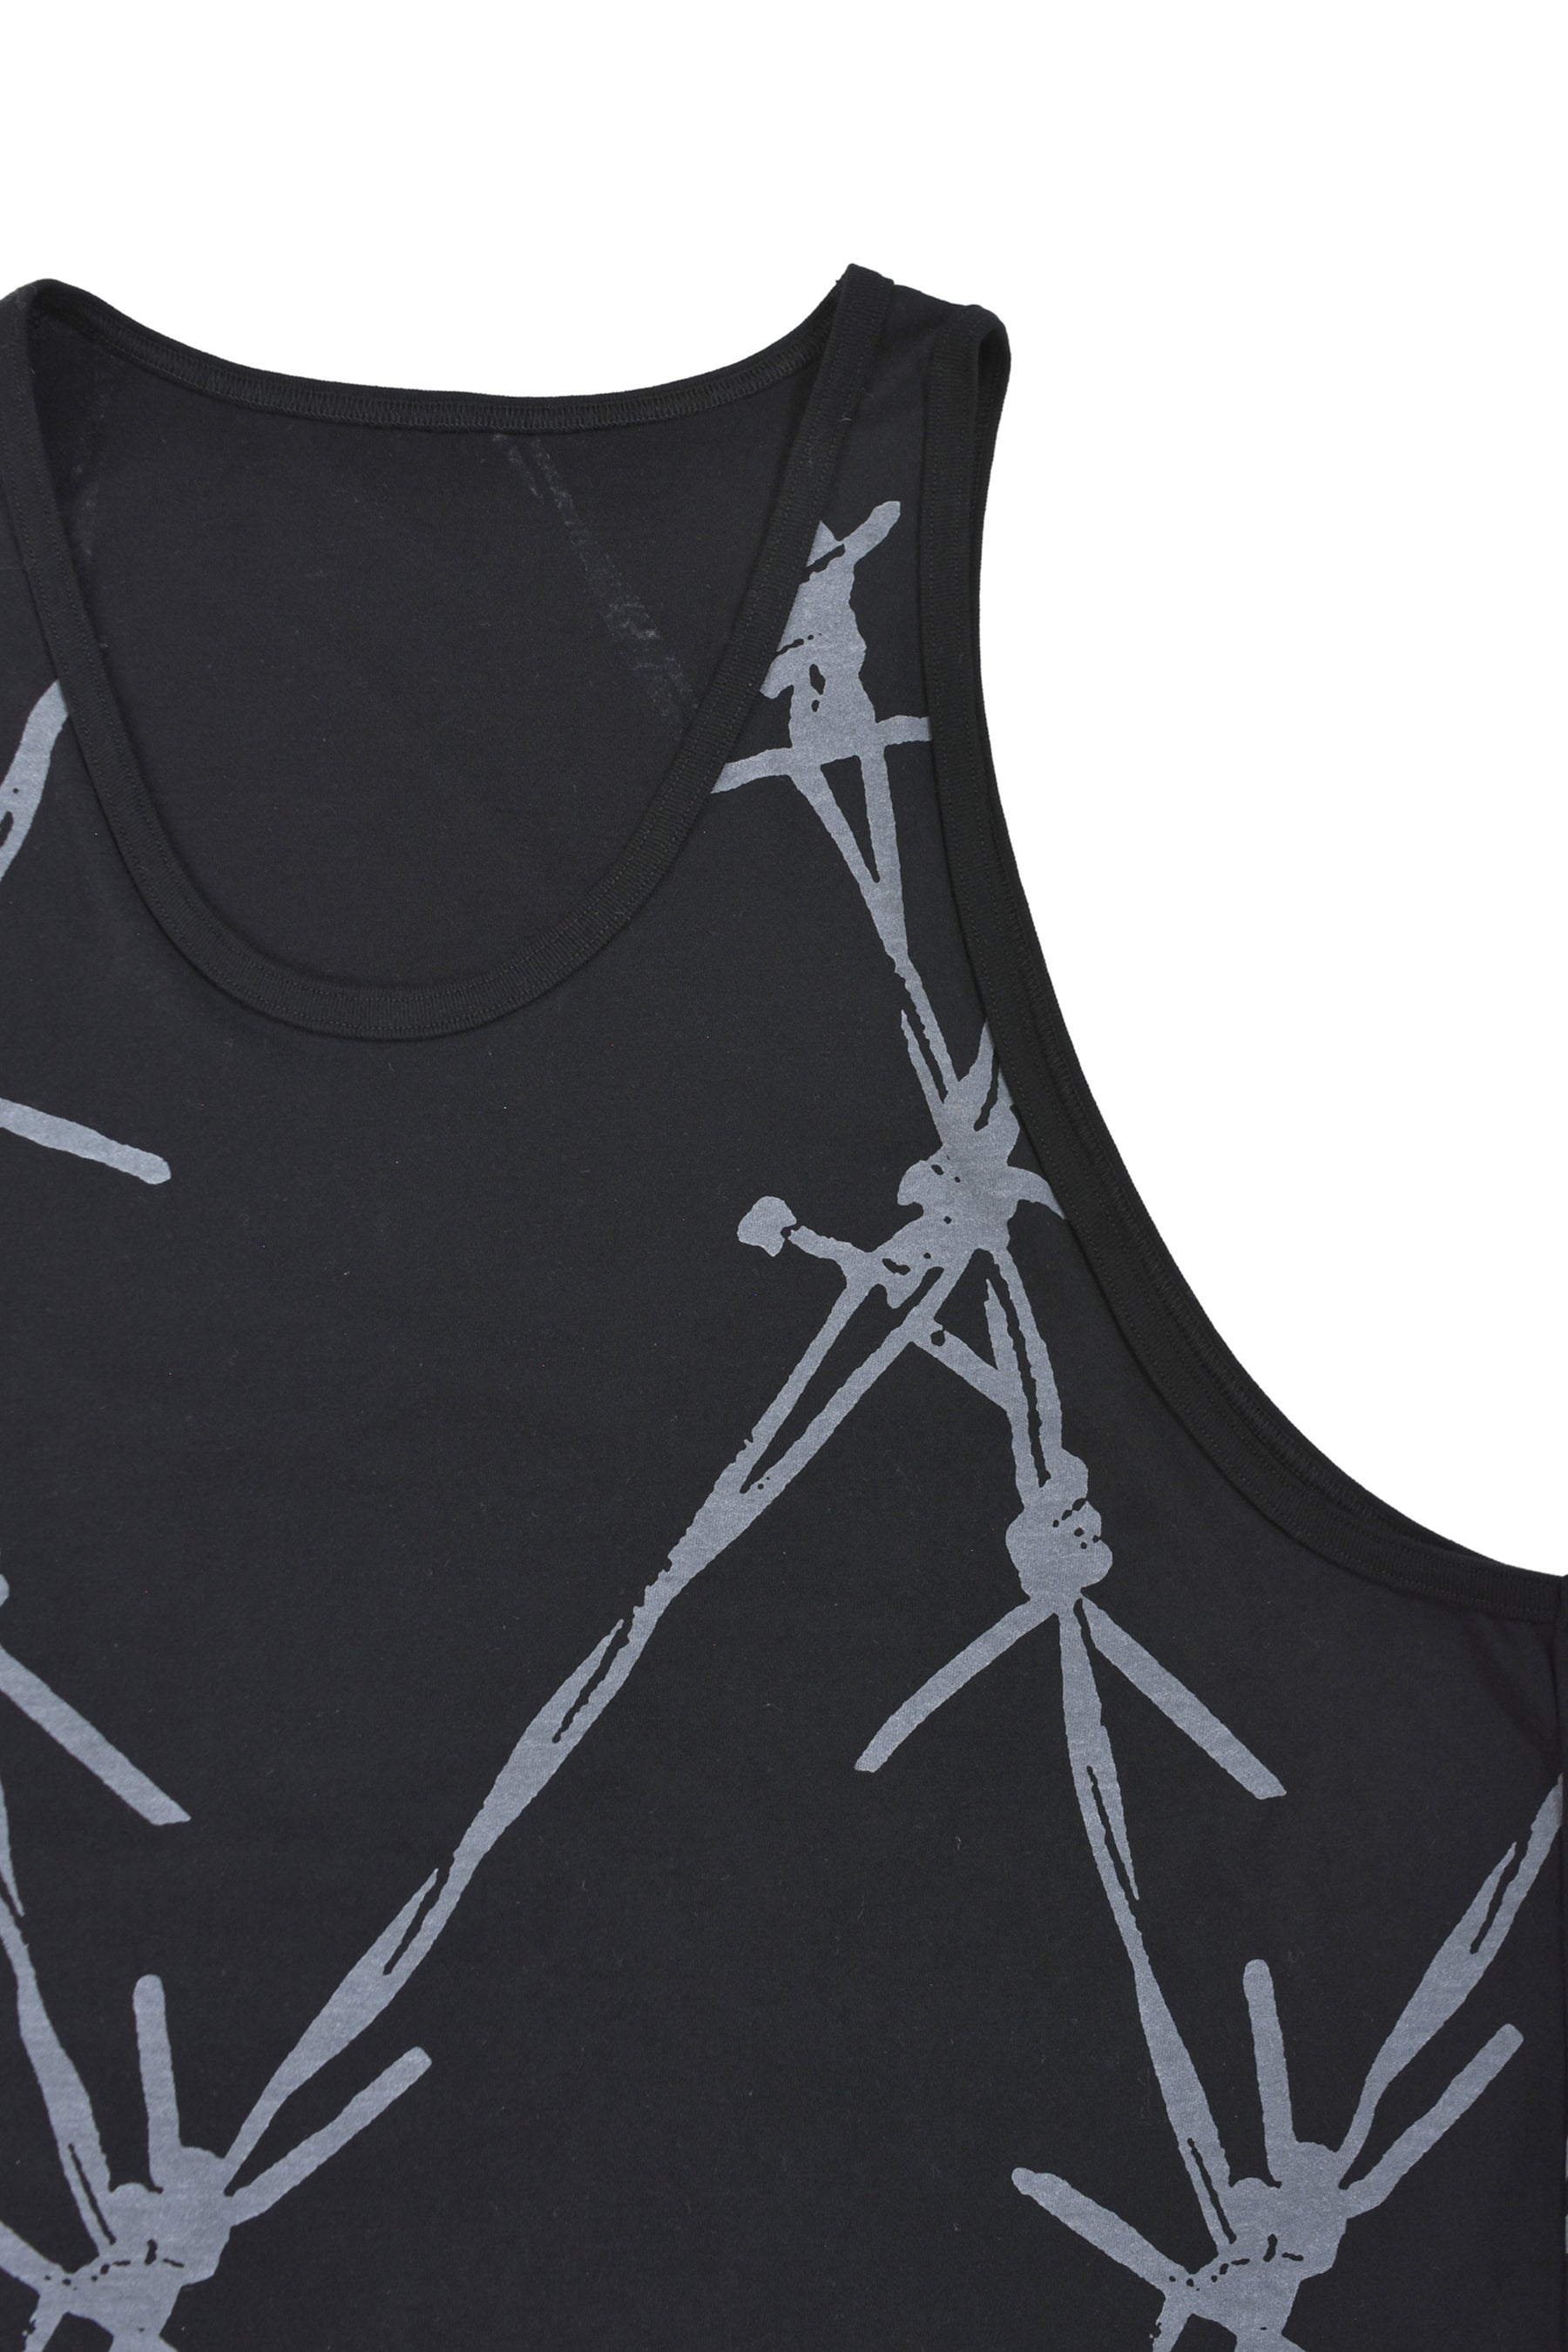 LONG TANK TOP “BARBED WIRE” / BLK